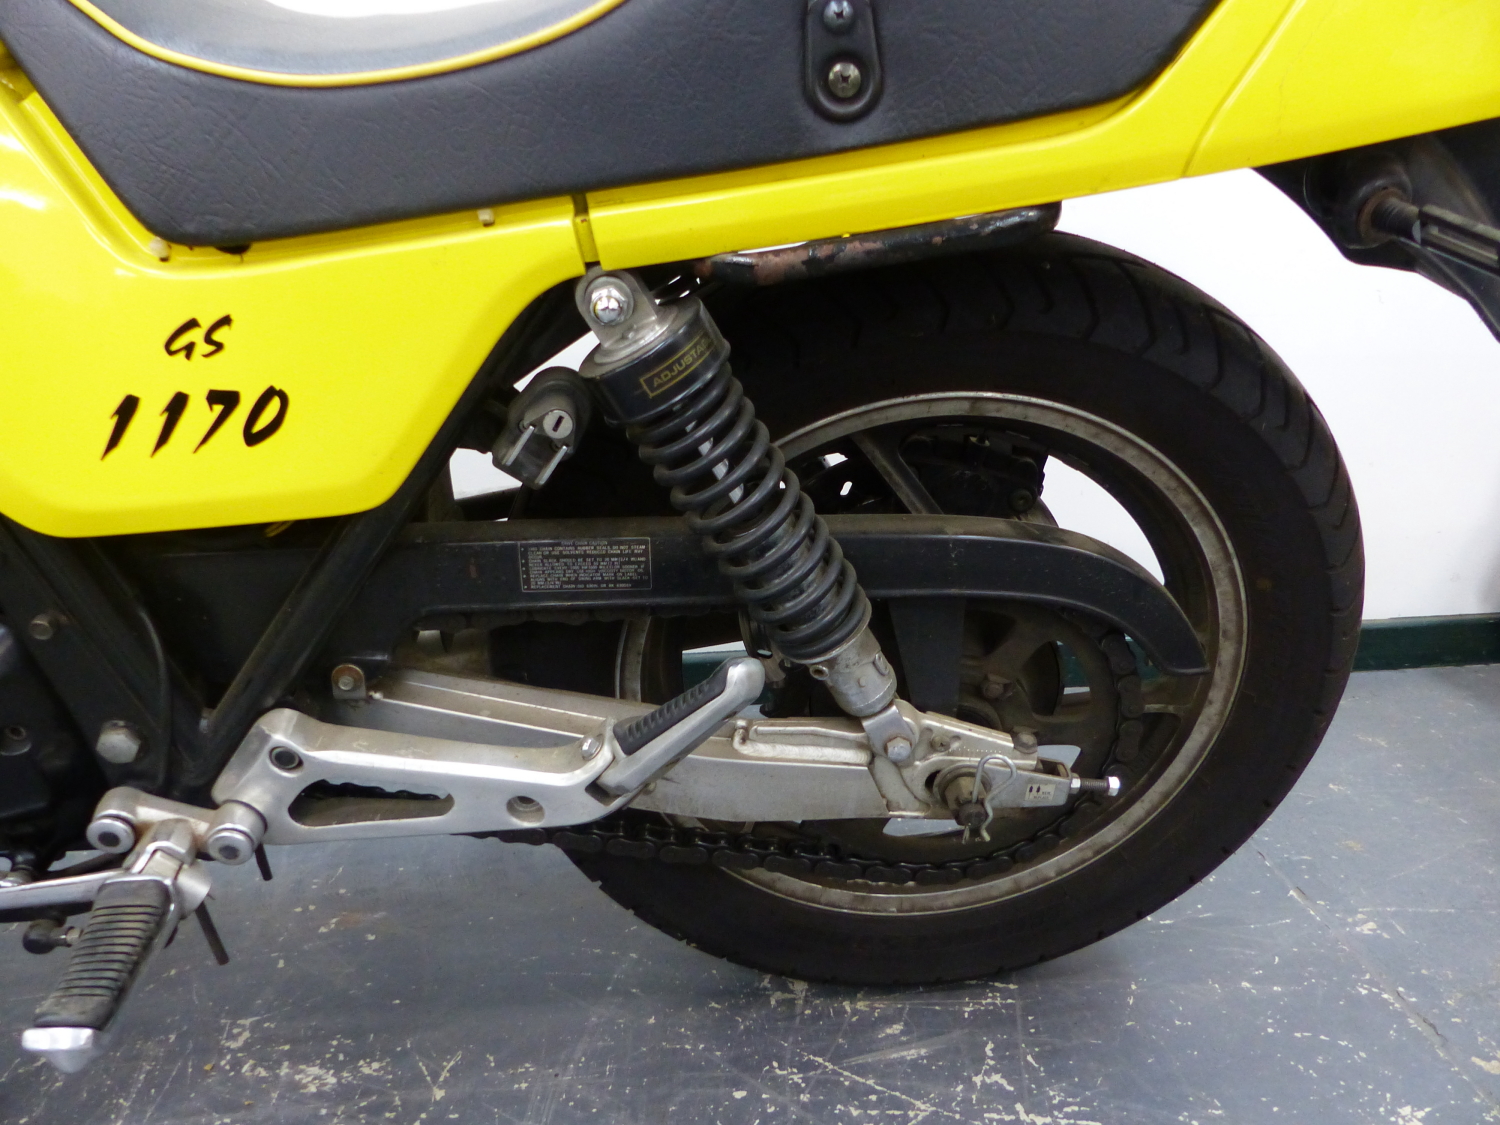 SUZUKI GSX1100E (1983) REG NO KEG 557Y GSX1100E- THIS CUSTOMISED 1983 GSX, SUPPLIED NEW ABROAD AND - Image 4 of 12